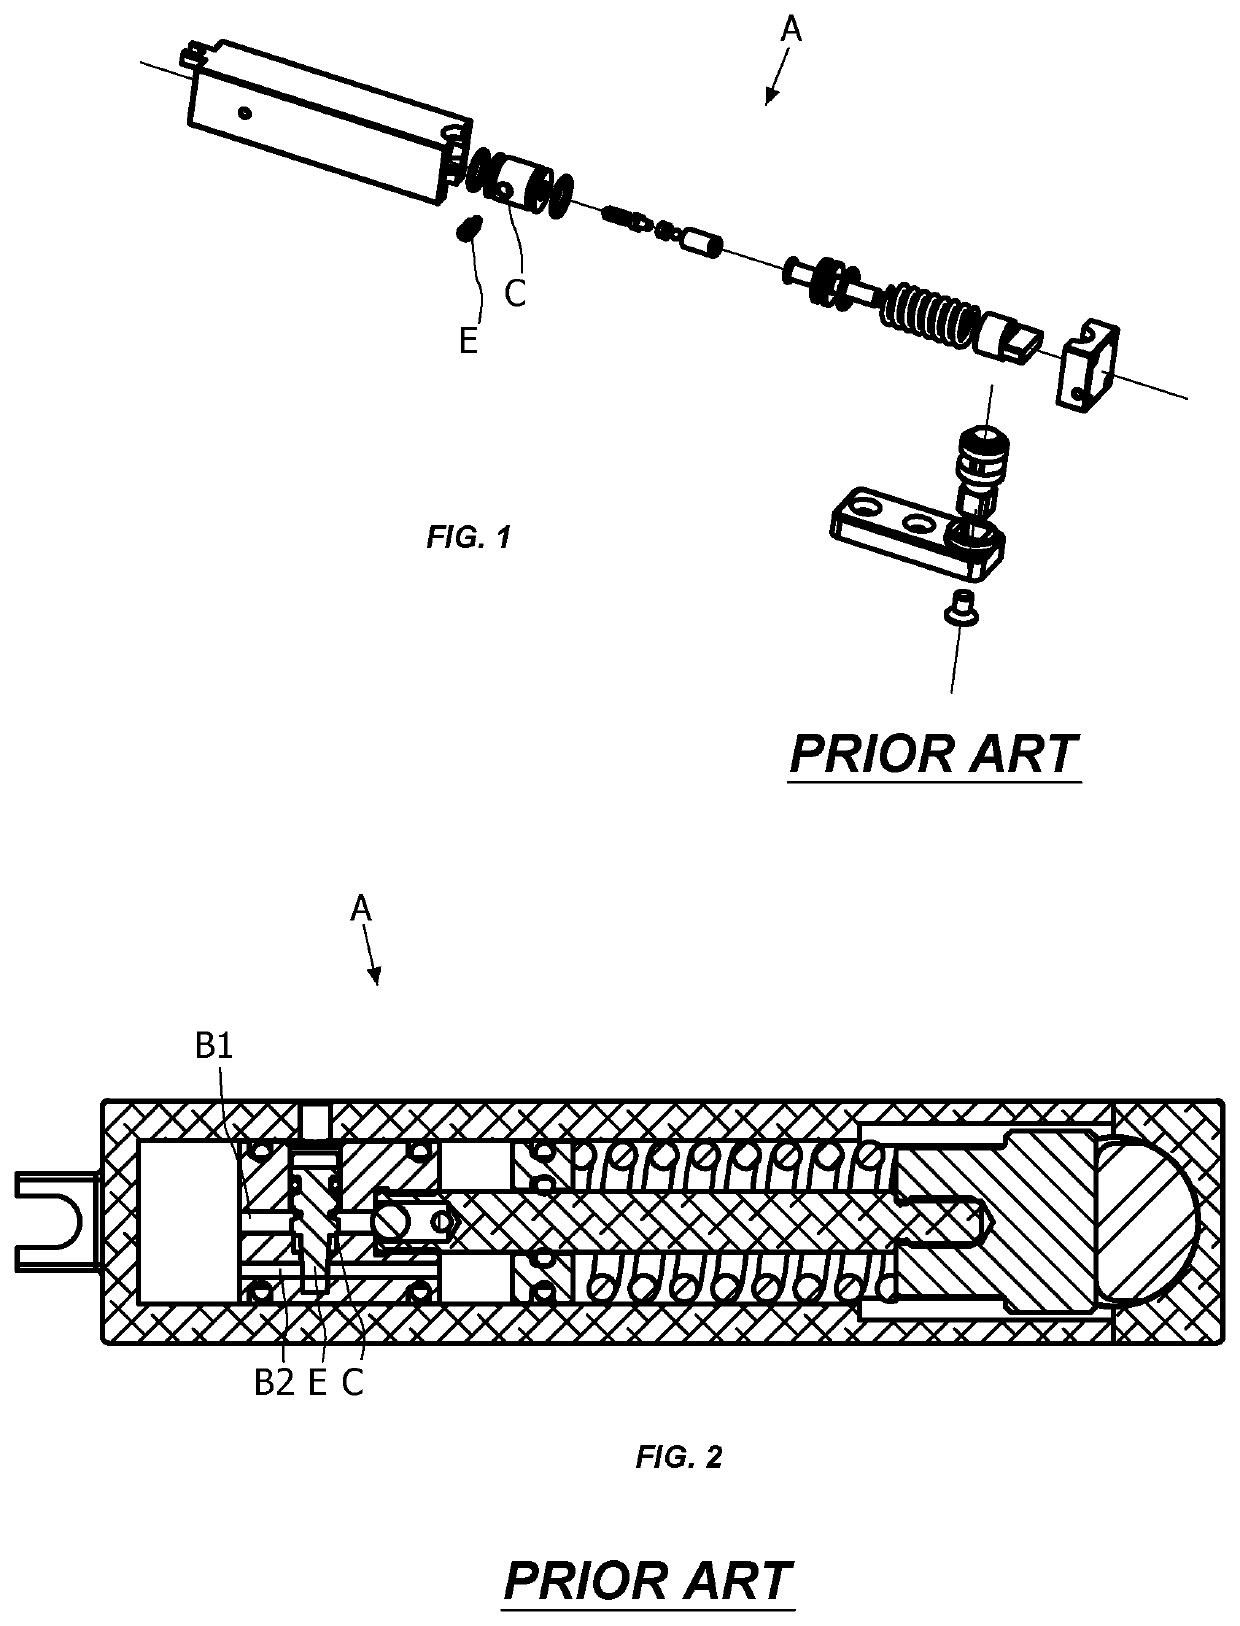 Hinge for the rotatable movement of a door or similar closing element